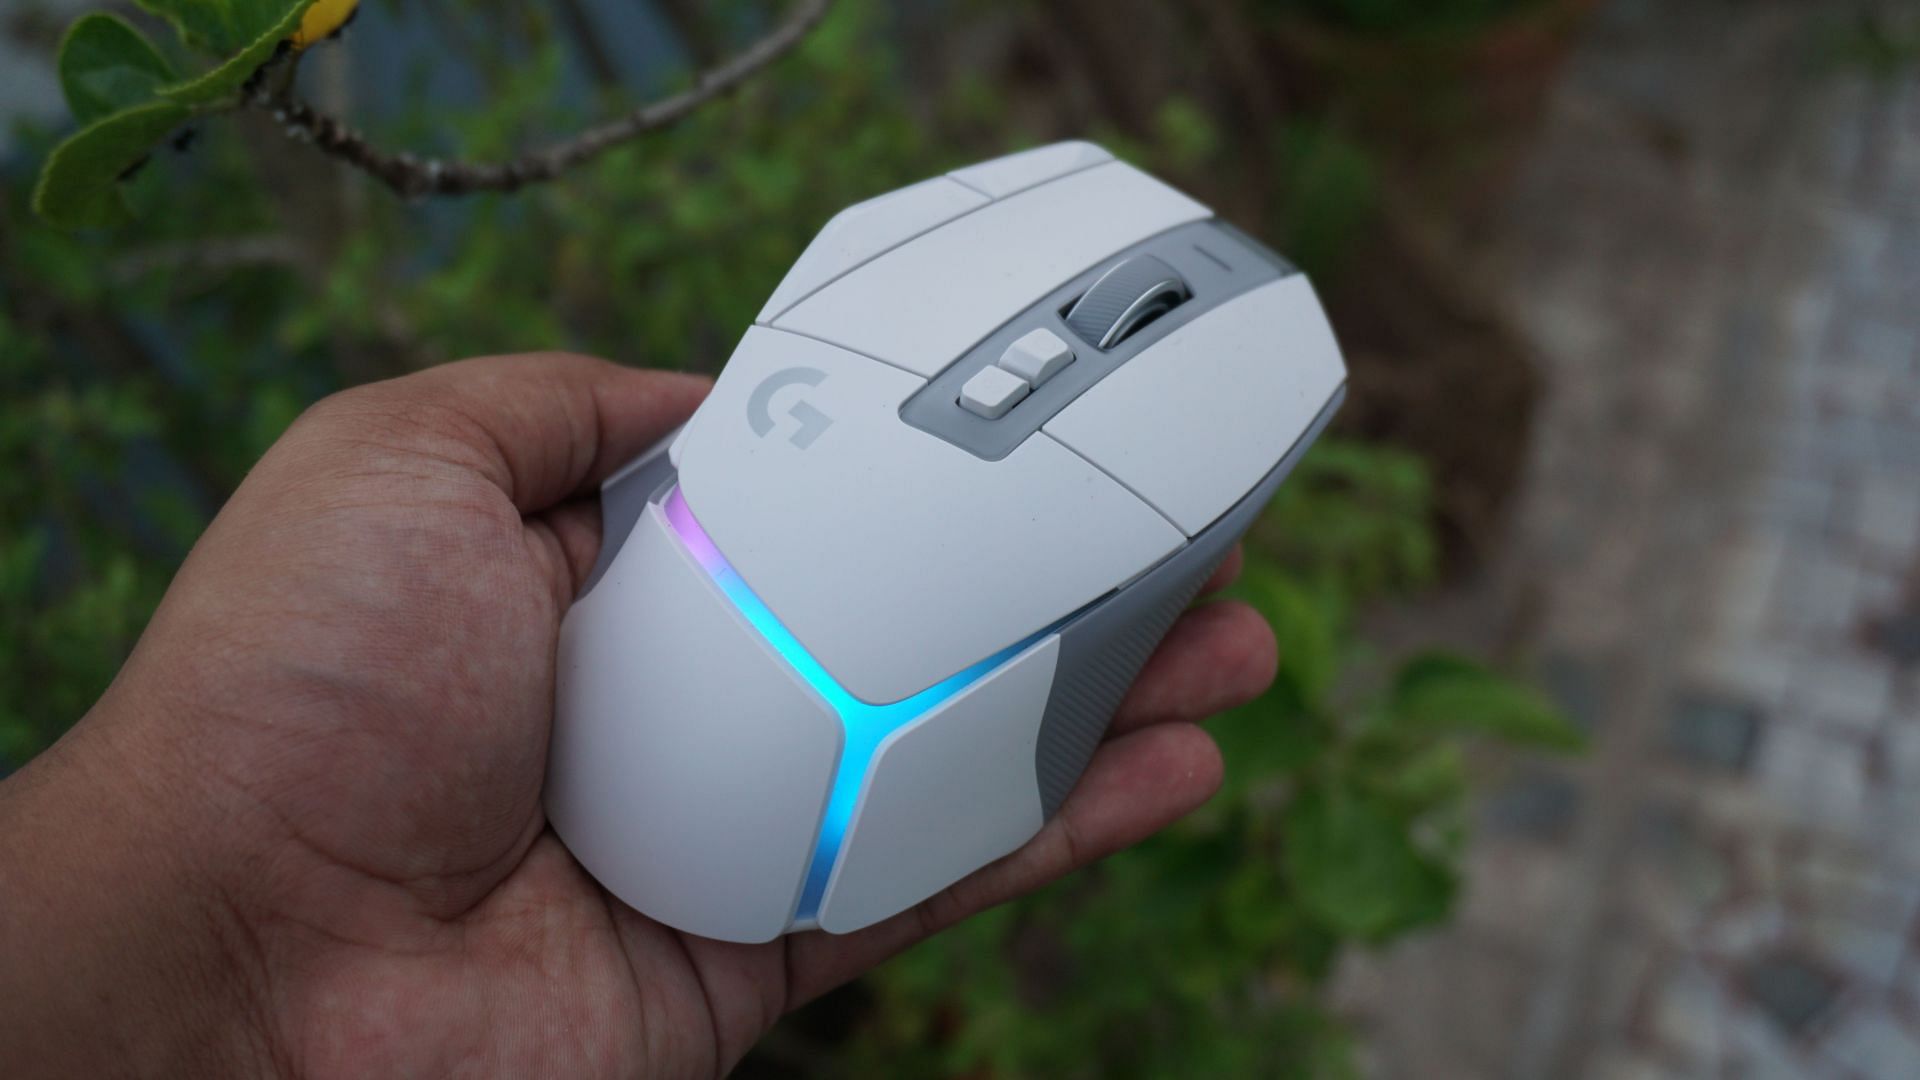 The buttons on the G502 X PLUS feel responsive and tactile (Image via Sportskeeda)